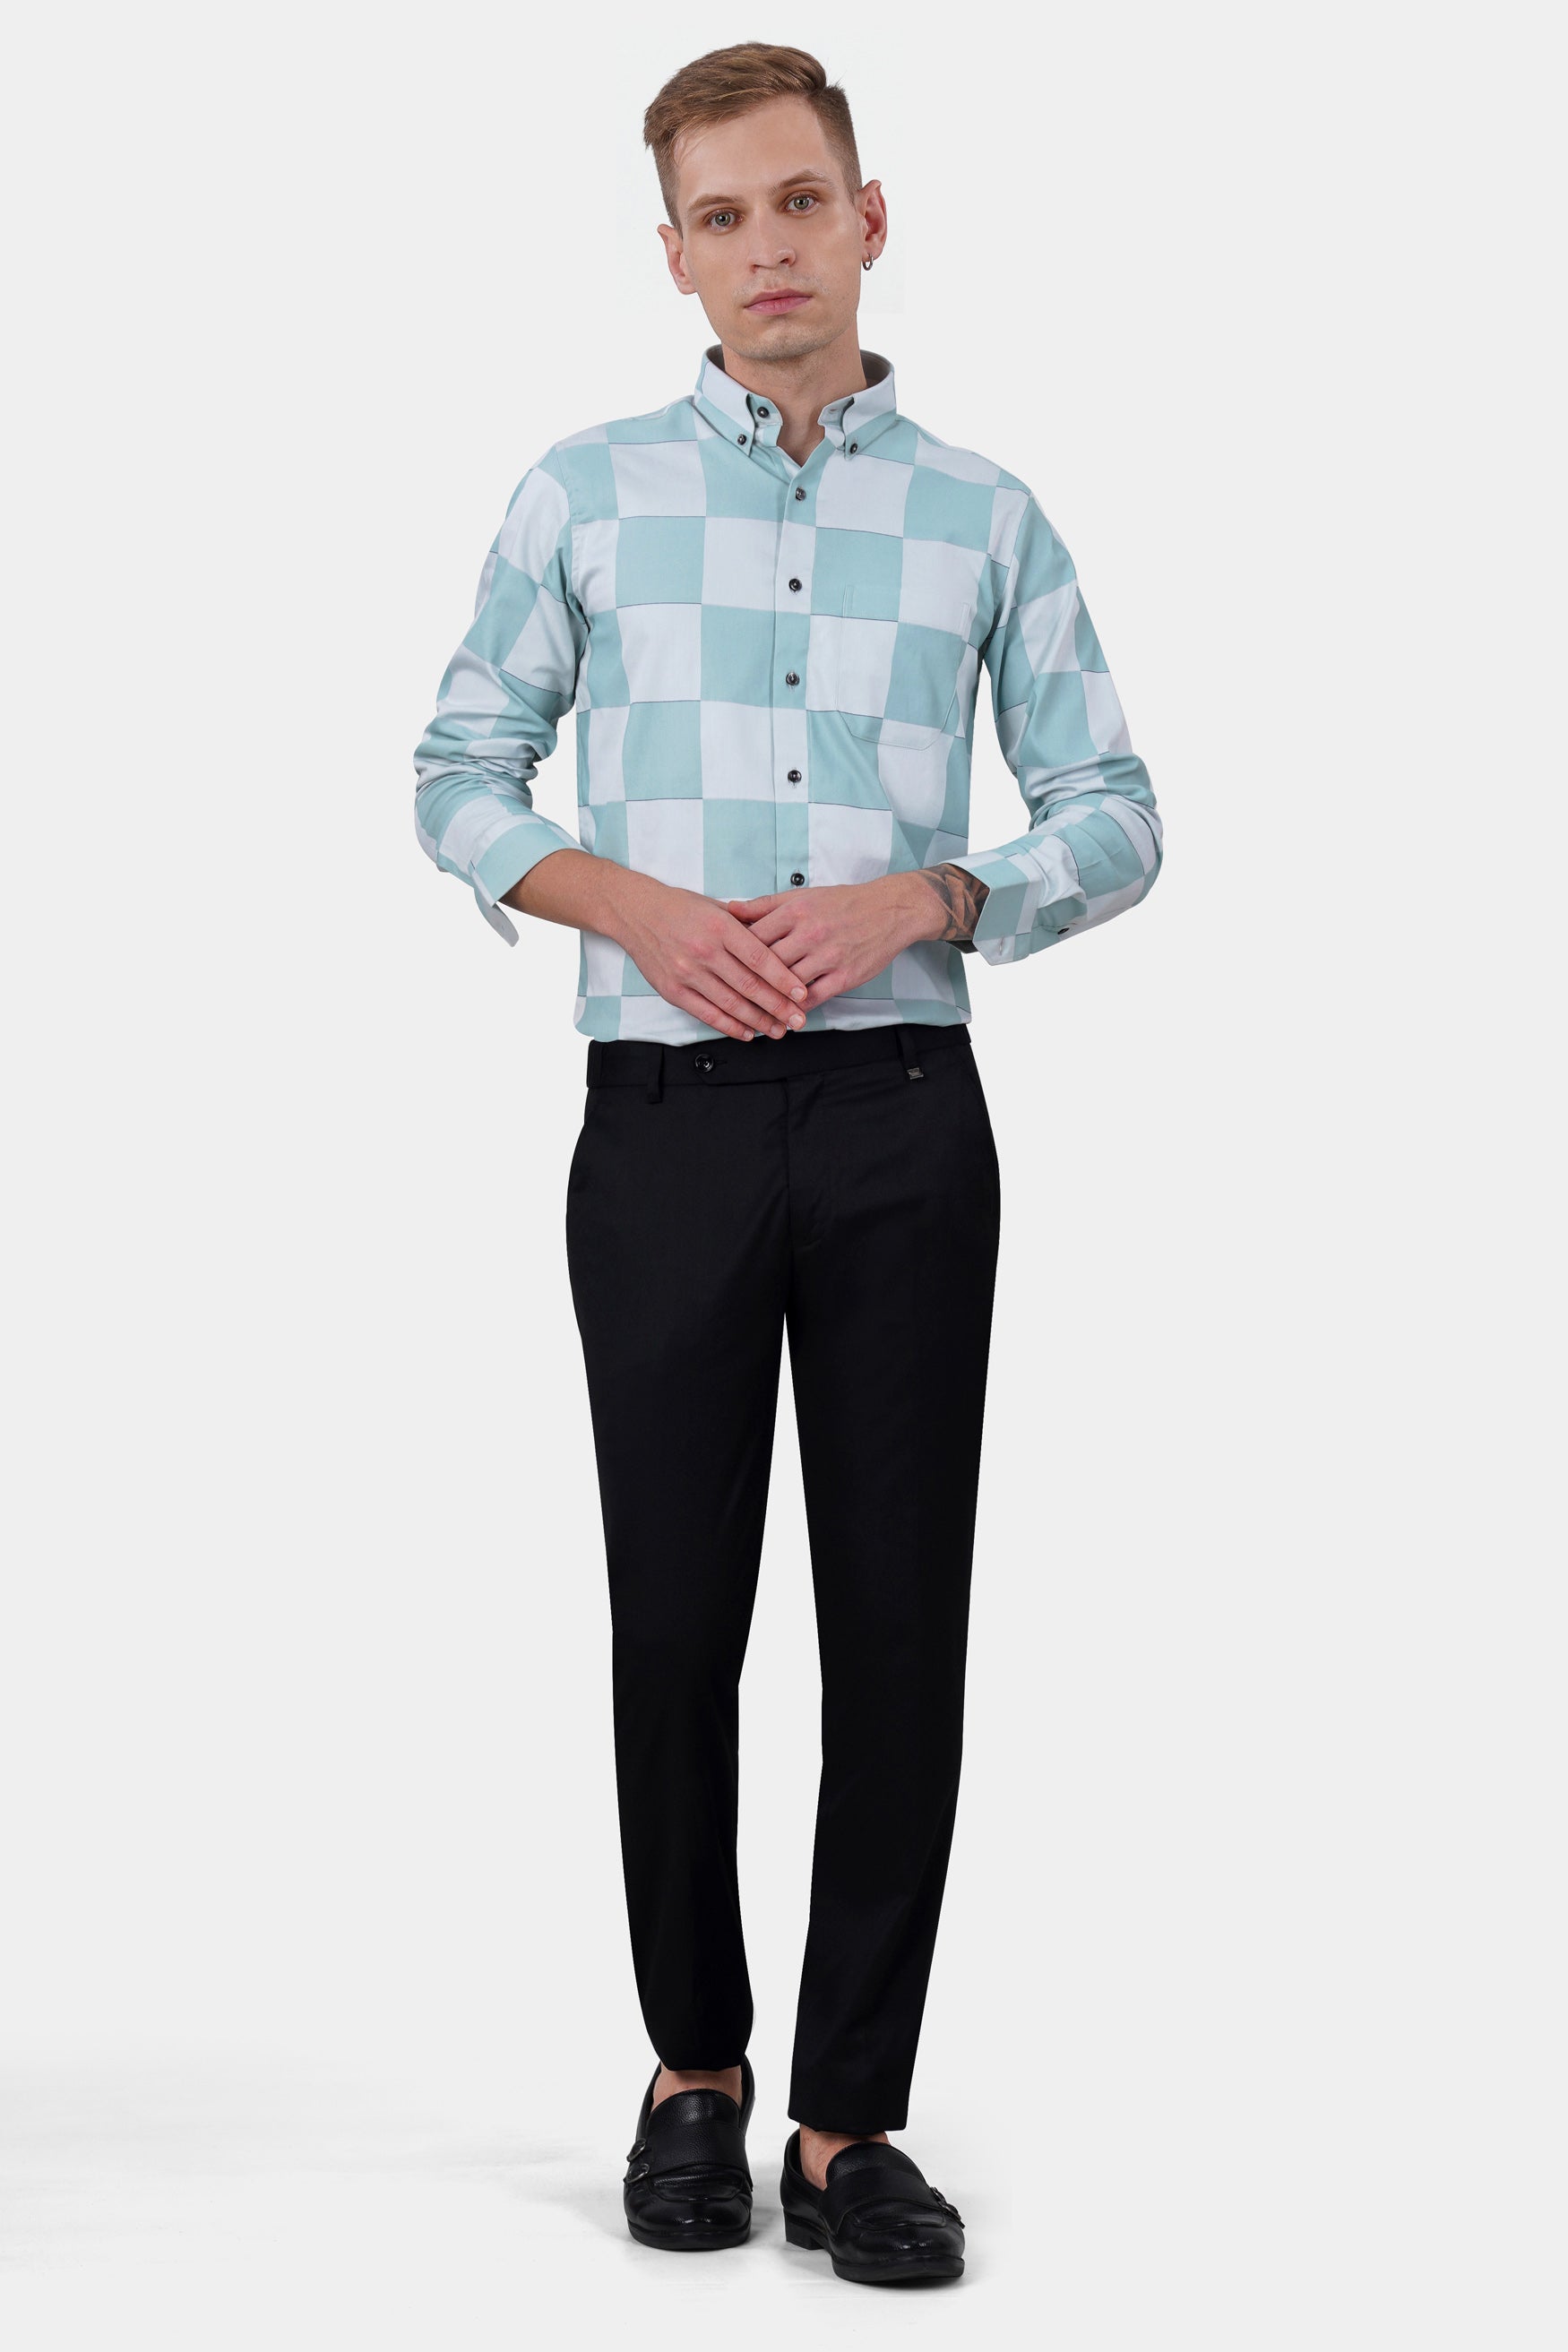 Gull Blue and Ghost Gray Checked Subtle Sheen Super Soft Premium Cotton Shirt 11749-BD-BLK-38, 11749-BD-BLK-H-38, 11749-BD-BLK-39, 11749-BD-BLK-H-39, 11749-BD-BLK-40, 11749-BD-BLK-H-40, 11749-BD-BLK-42, 11749-BD-BLK-H-42, 11749-BD-BLK-44, 11749-BD-BLK-H-44, 11749-BD-BLK-46, 11749-BD-BLK-H-46, 11749-BD-BLK-48, 11749-BD-BLK-H-48, 11749-BD-BLK-50, 11749-BD-BLK-H-50, 11749-BD-BLK-52, 11749-BD-BLK-H-52